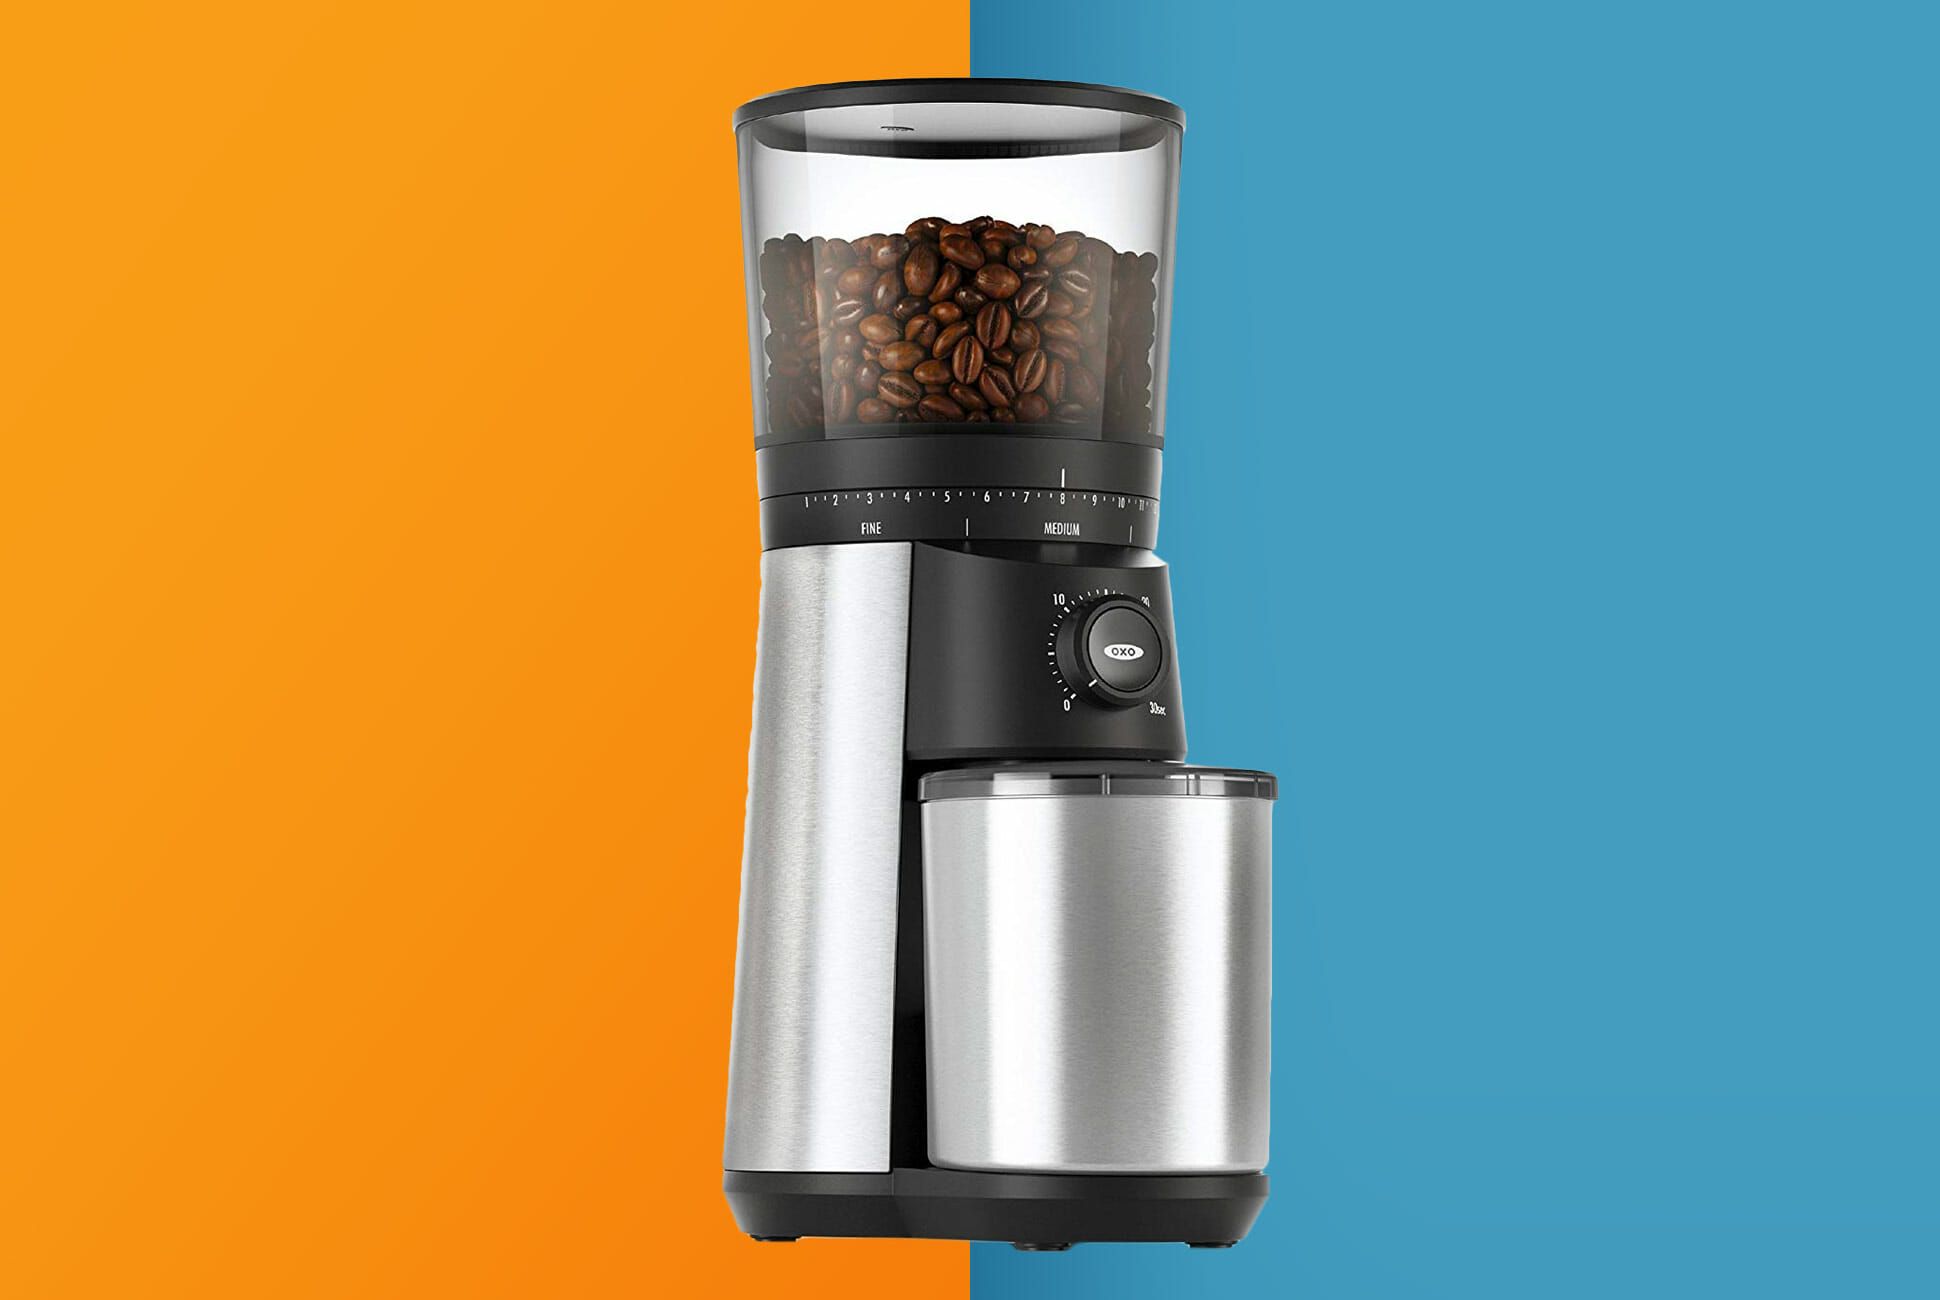 OXO's New Coffee Grinder Has the Same Features of Products Twice Its Price